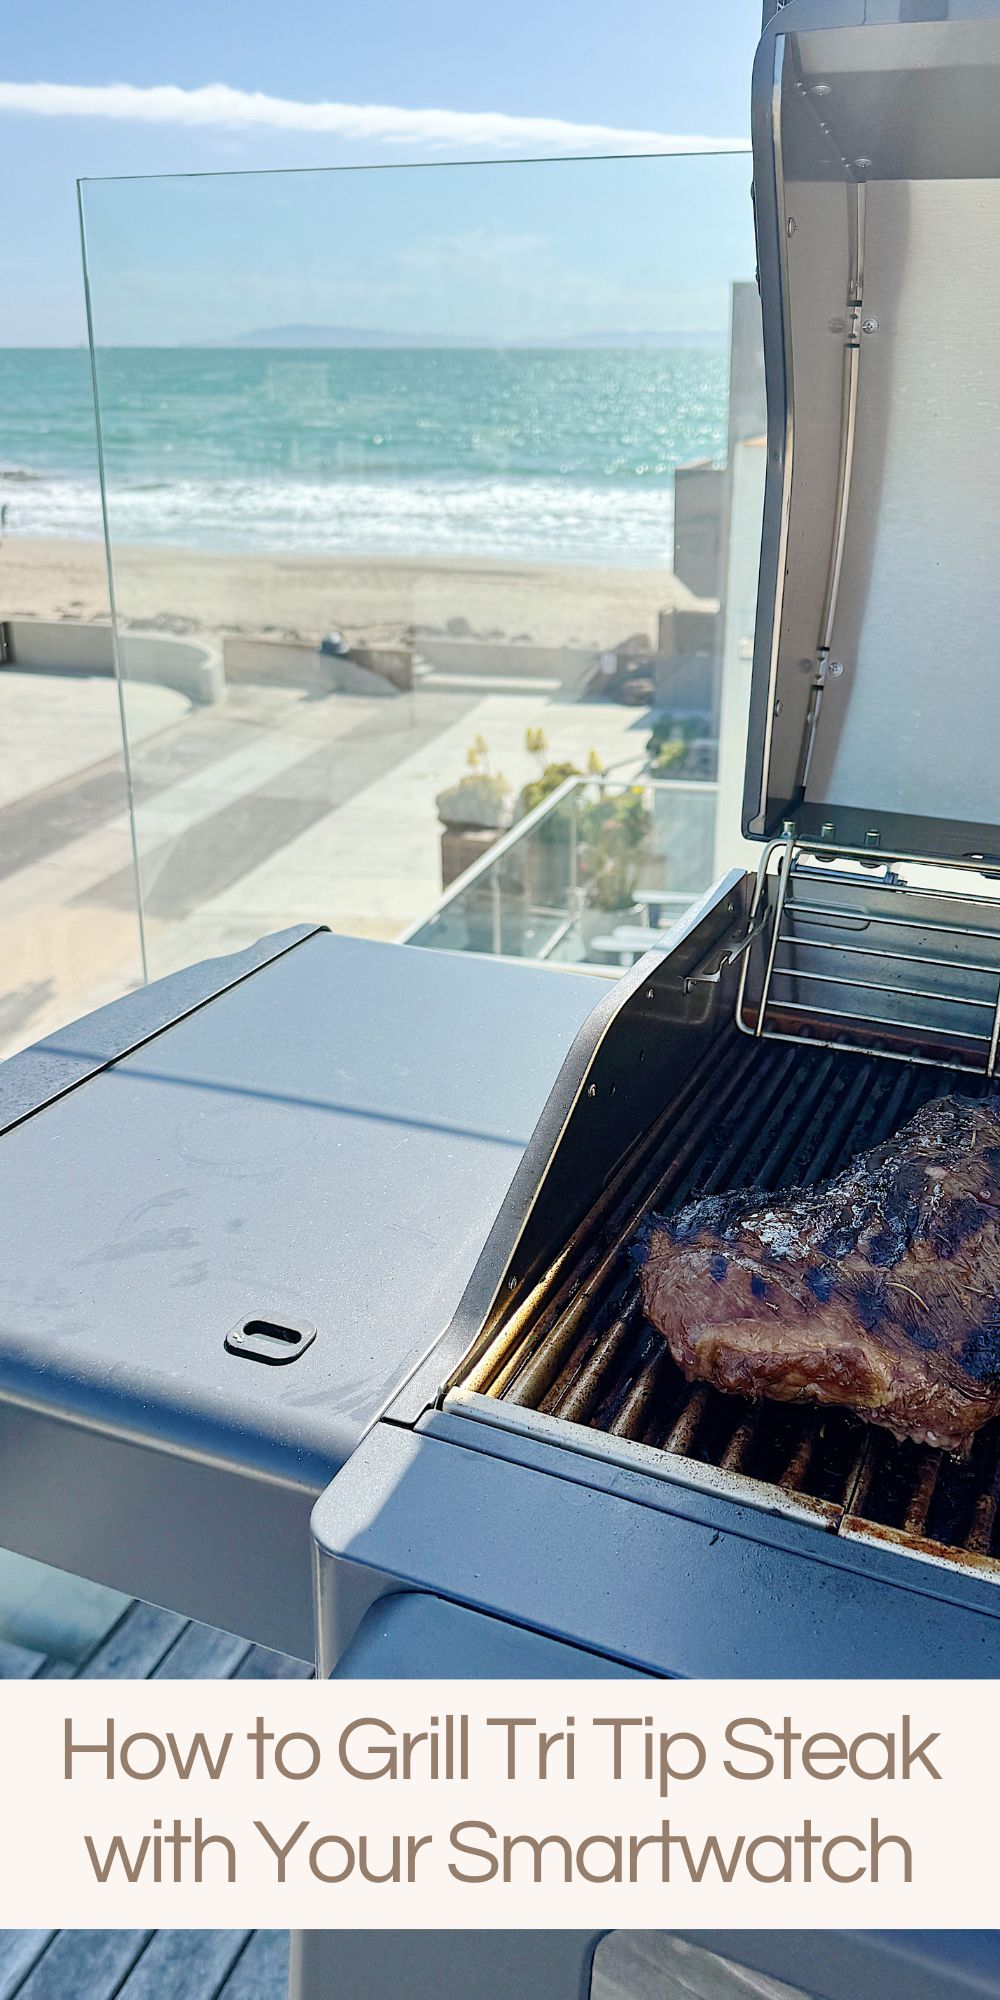 I just finished grilling a tender, flavorful tri-tip steak with a delicious marinade. And would you believe I monitored the entire process with my smartwatch?